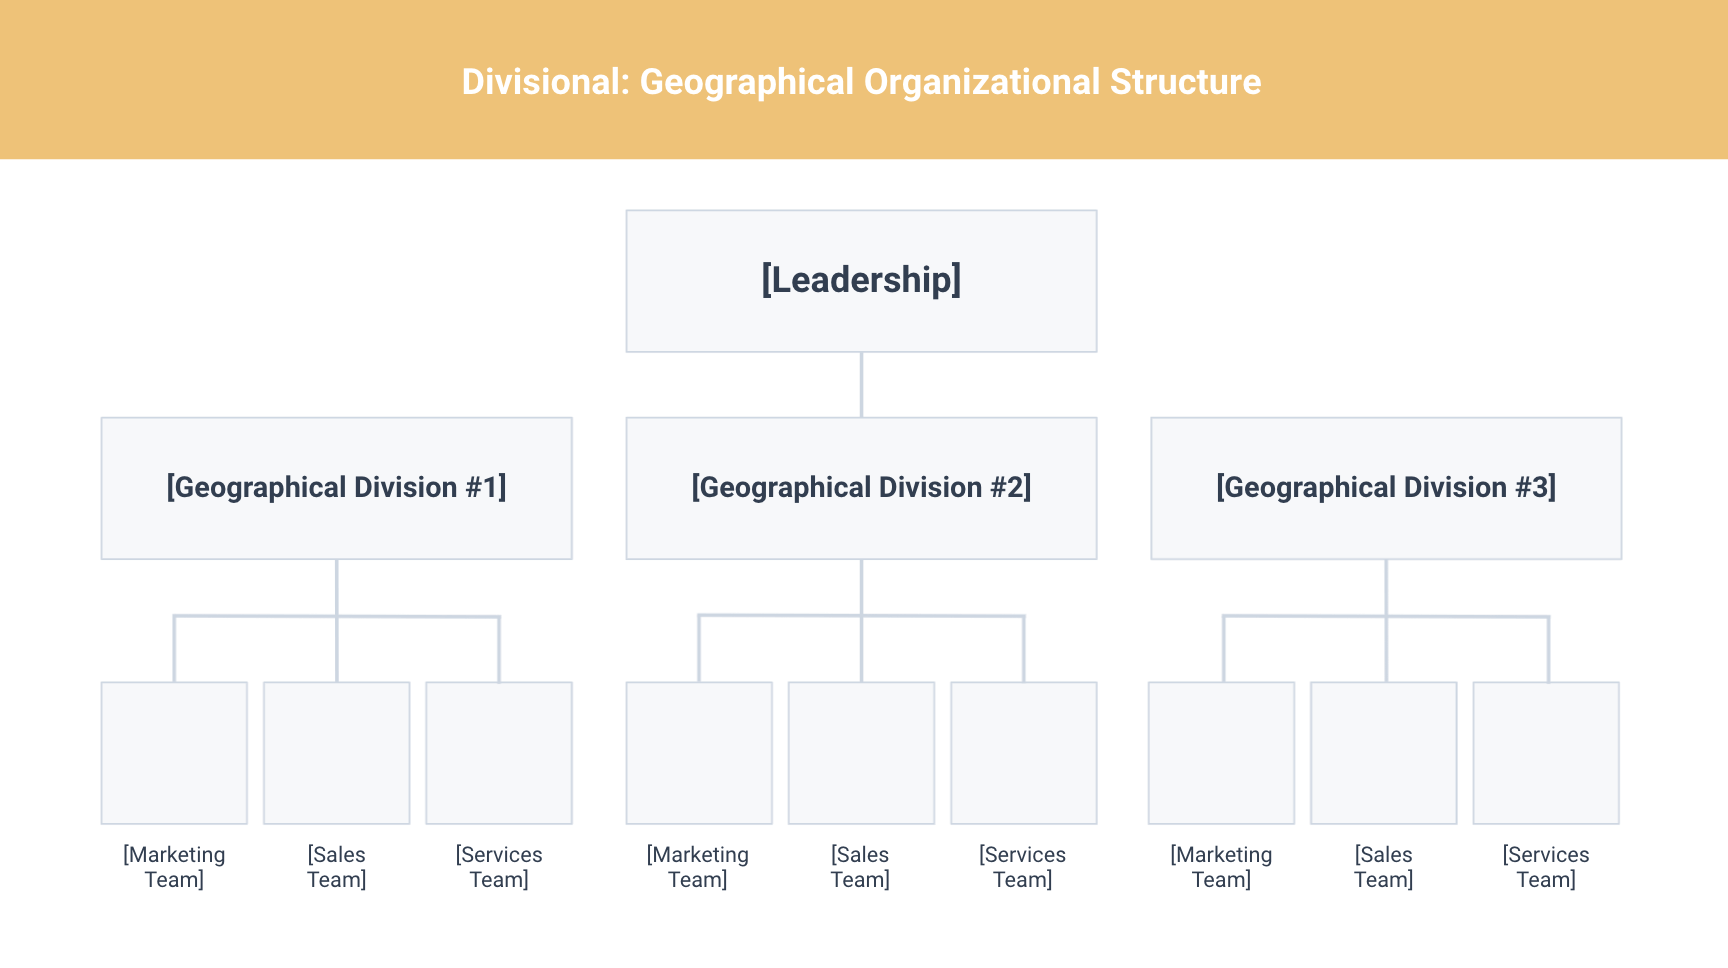 types of organizational structures: divisional geographical